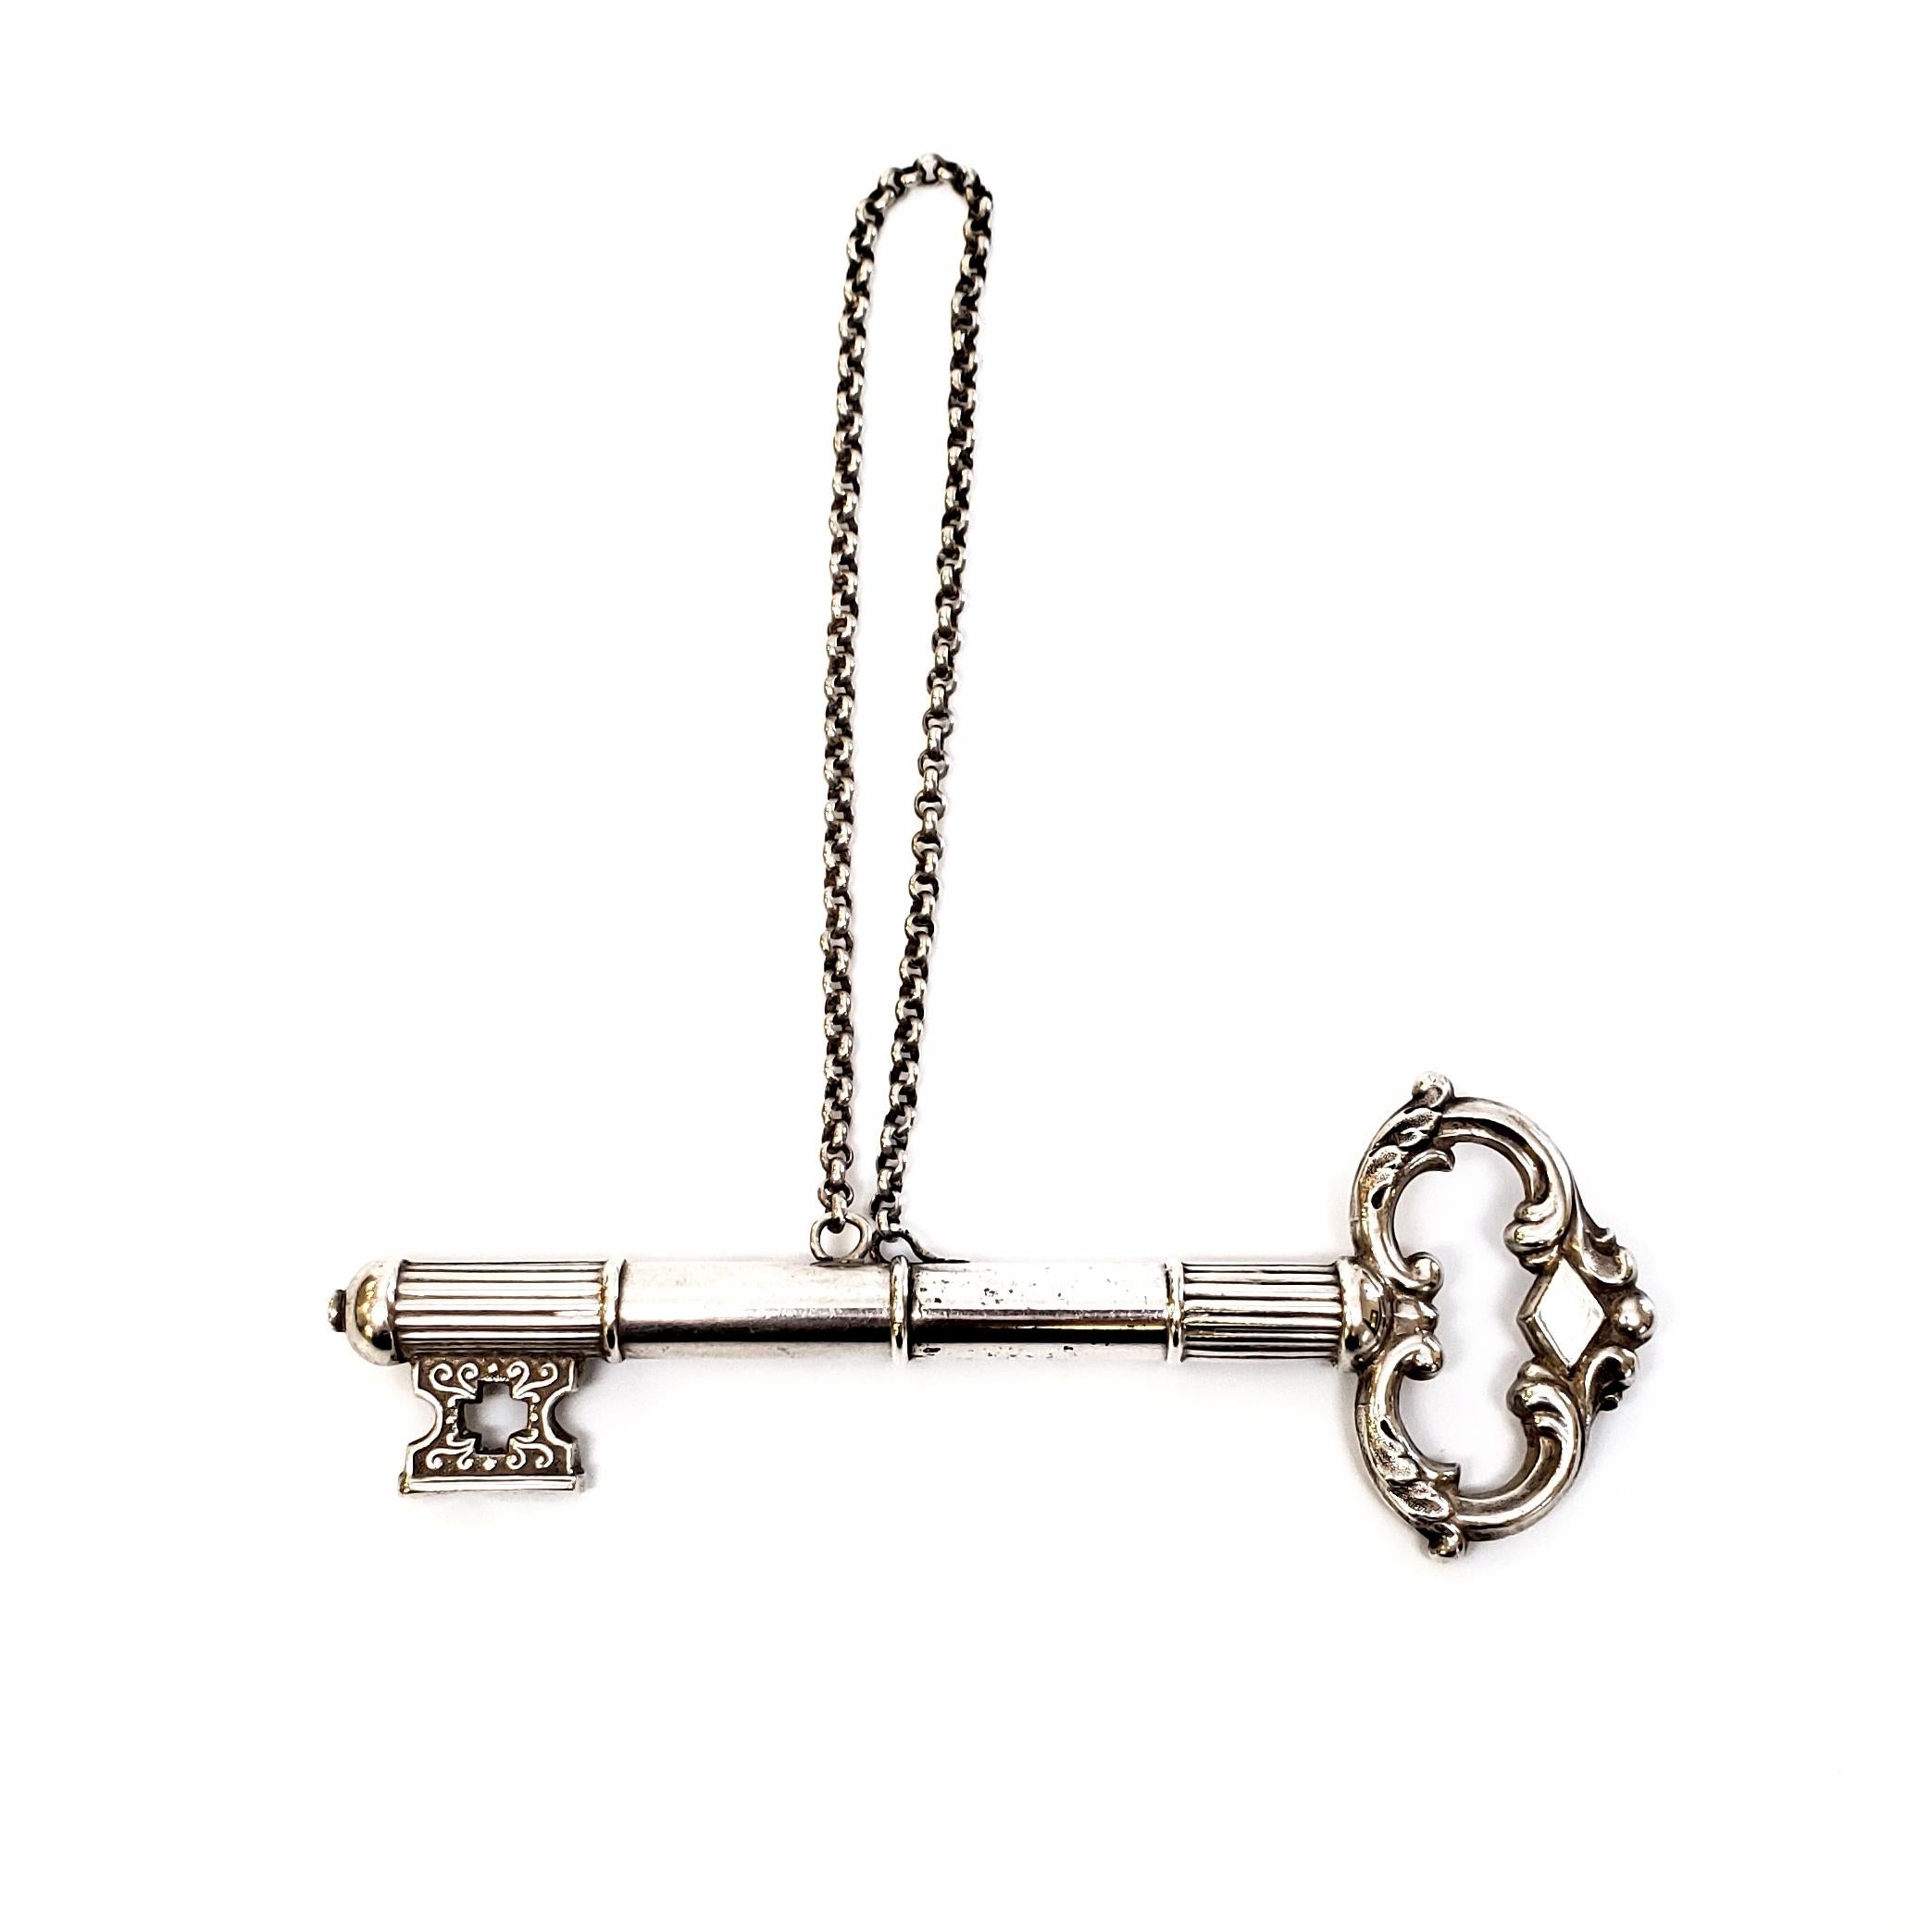 Antique silver key needle case with chatelaine chain.

The case turns in the middle to open and lock. Simple but elegant scroll design.

Measures: 4 1/4